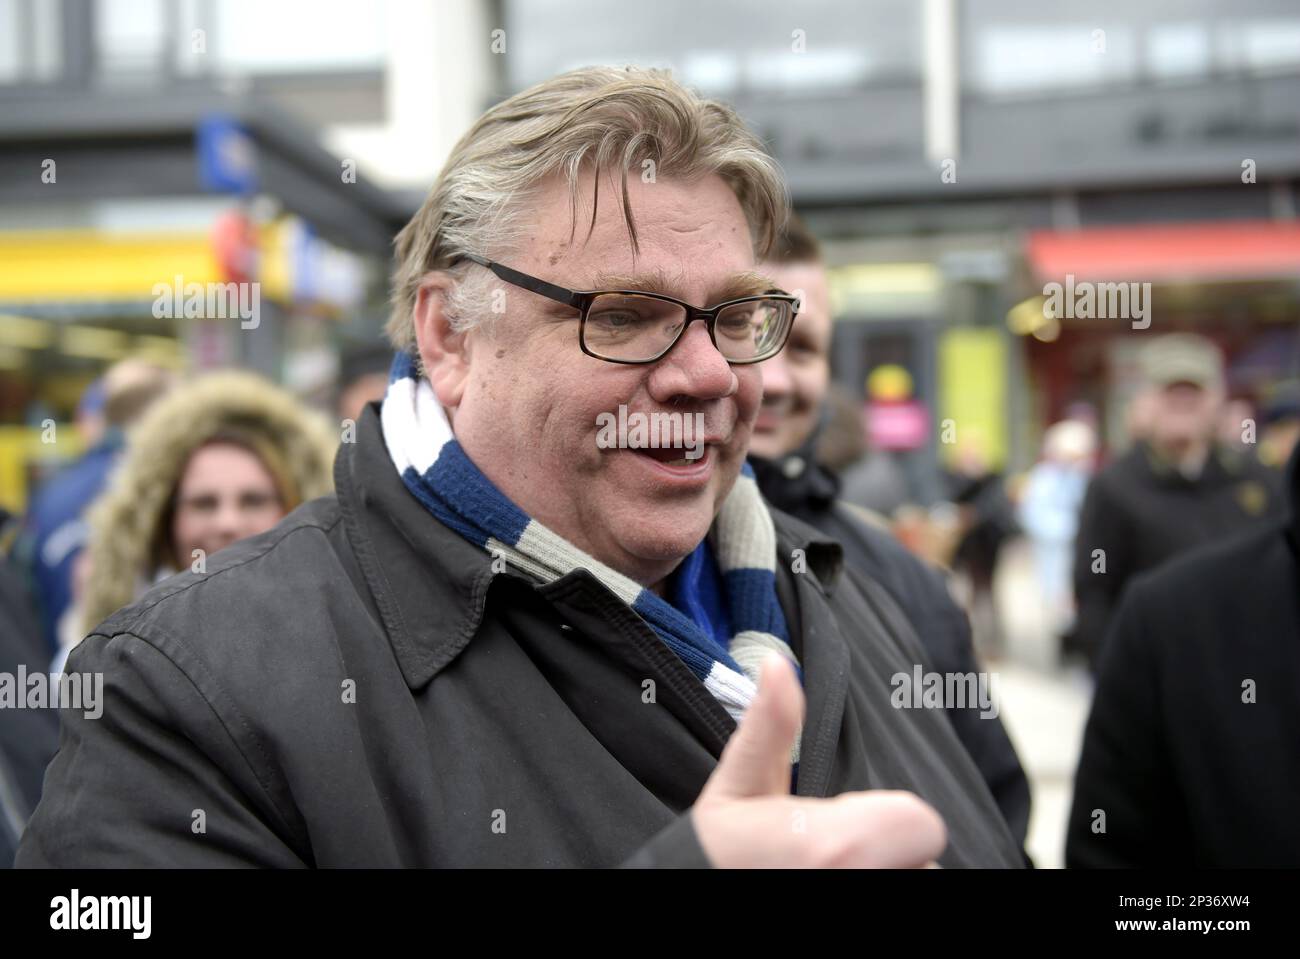 Chairman Timo Soini of the Finns Party campaigns in Vantaa, Finland,  Saturday, April 18, 2015, ahead of the parliamentary elections on Sunday.  Sunday's election comes against the backdrop of a three-year recession